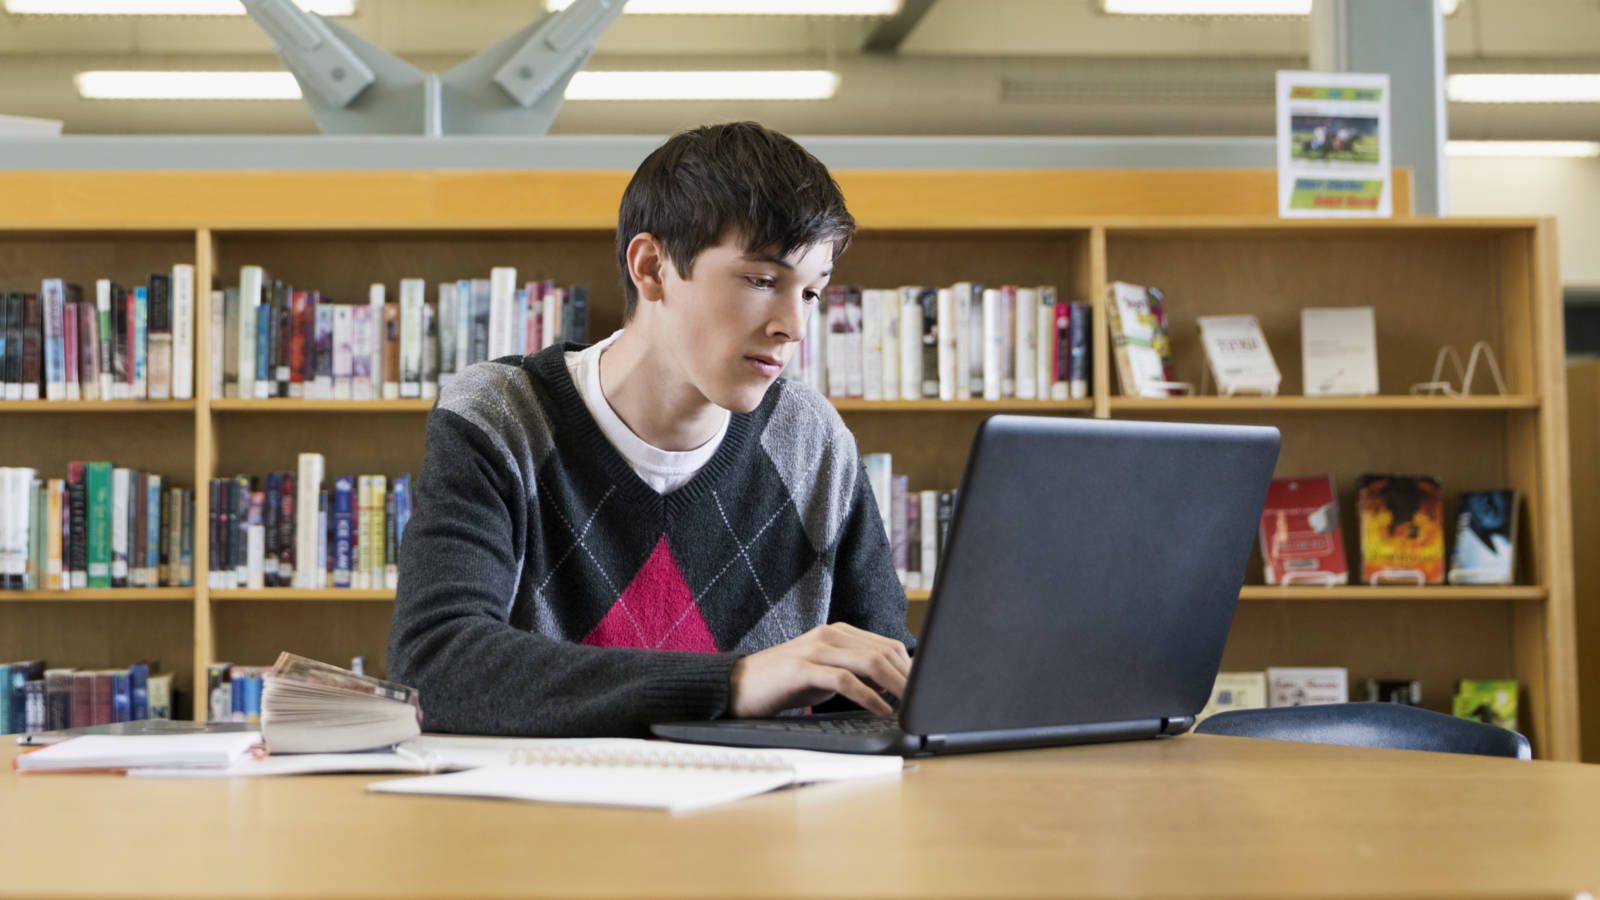 Focused high school student using laptop in library